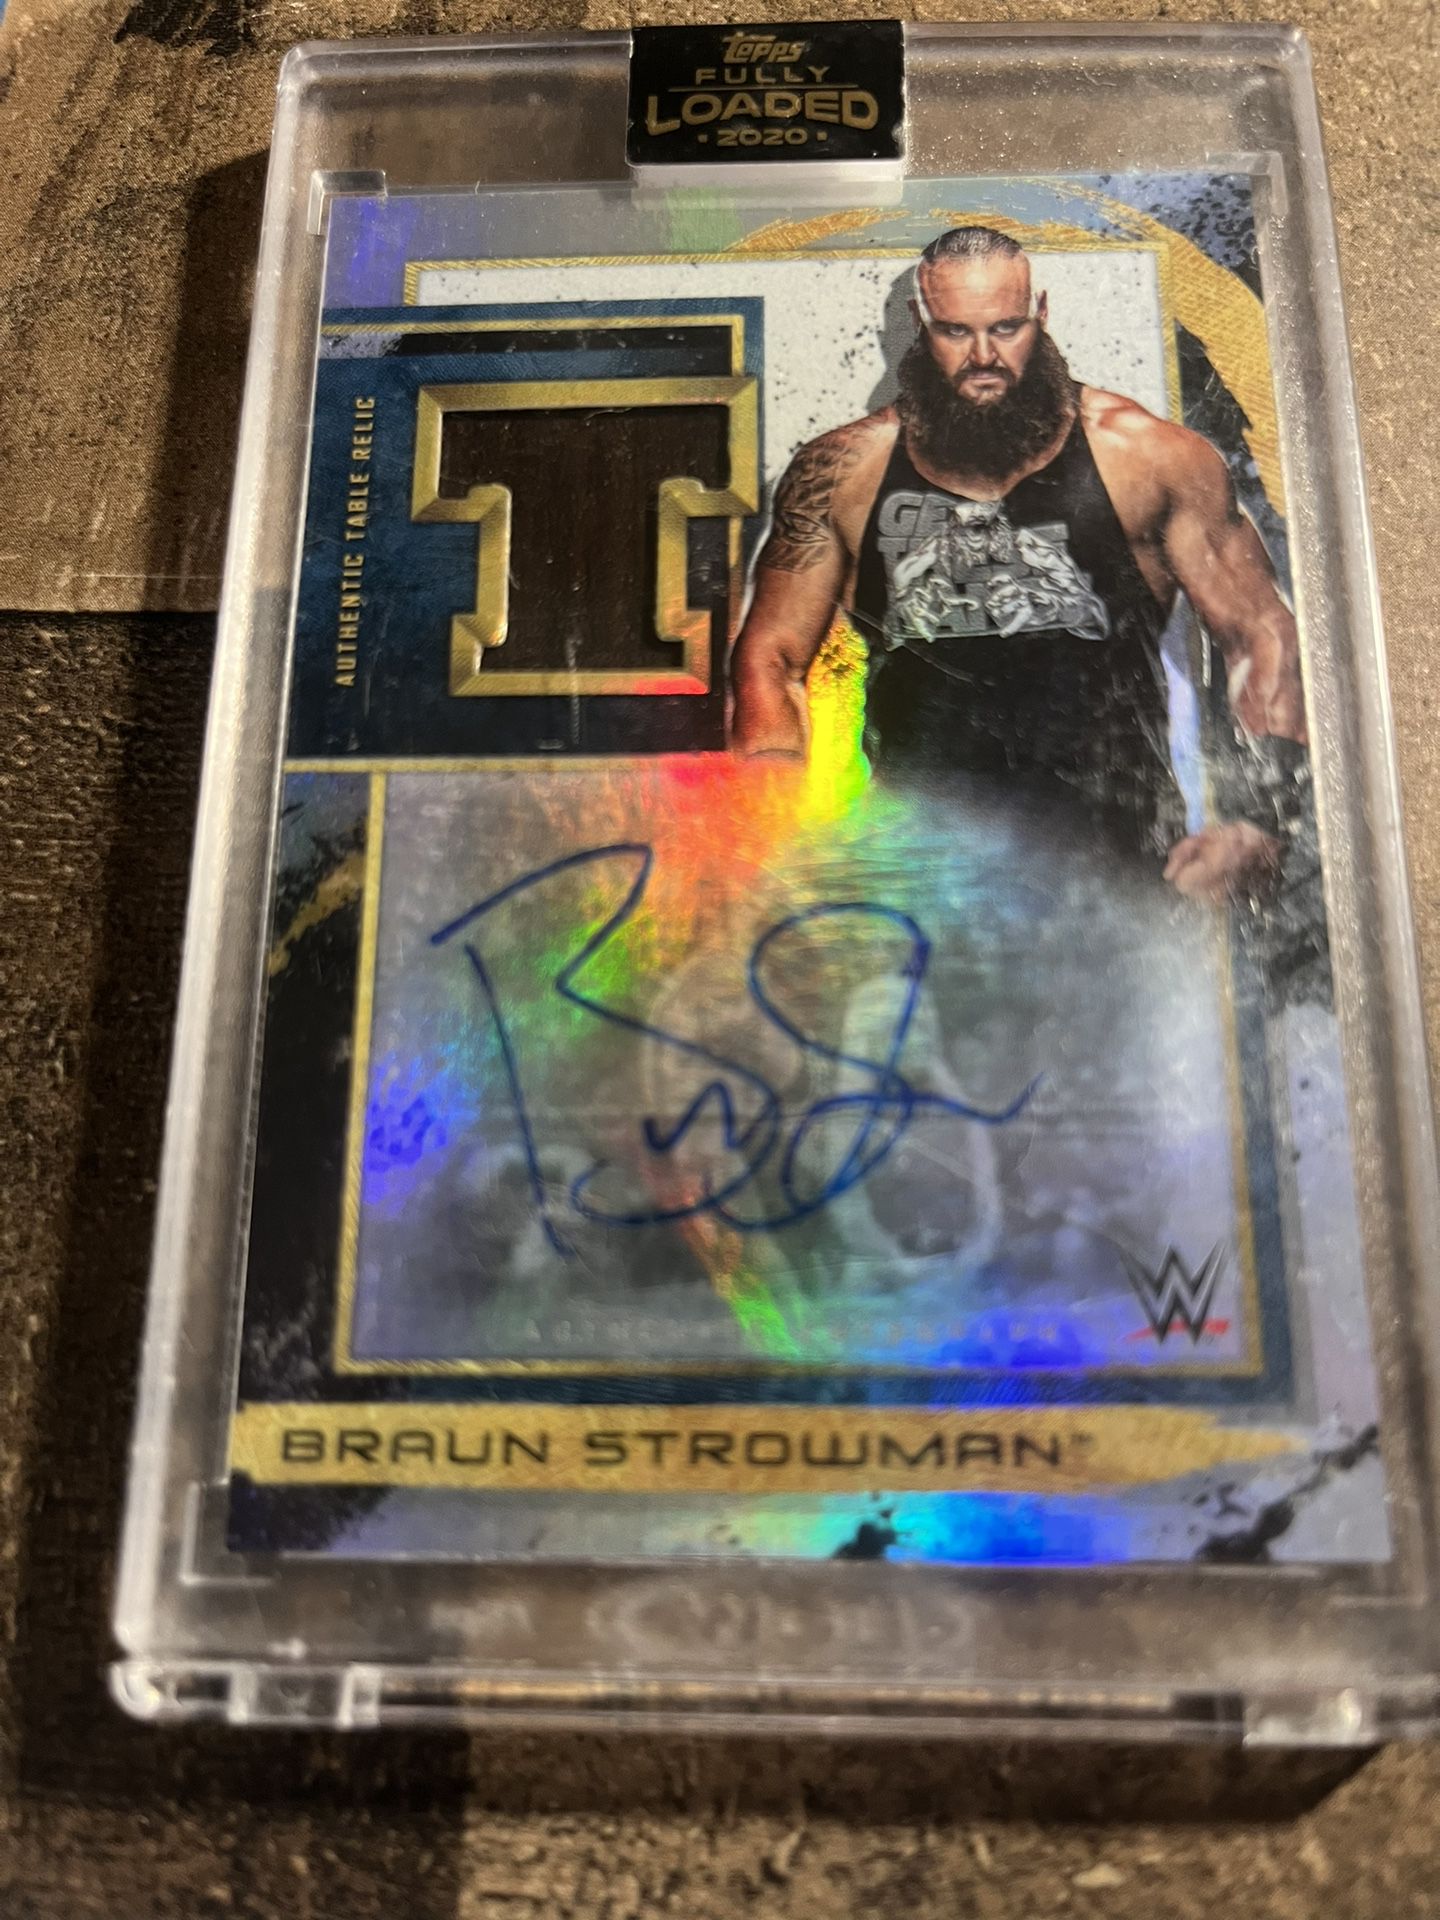 2020 topps fully loaded Braun strowman auto/relic card